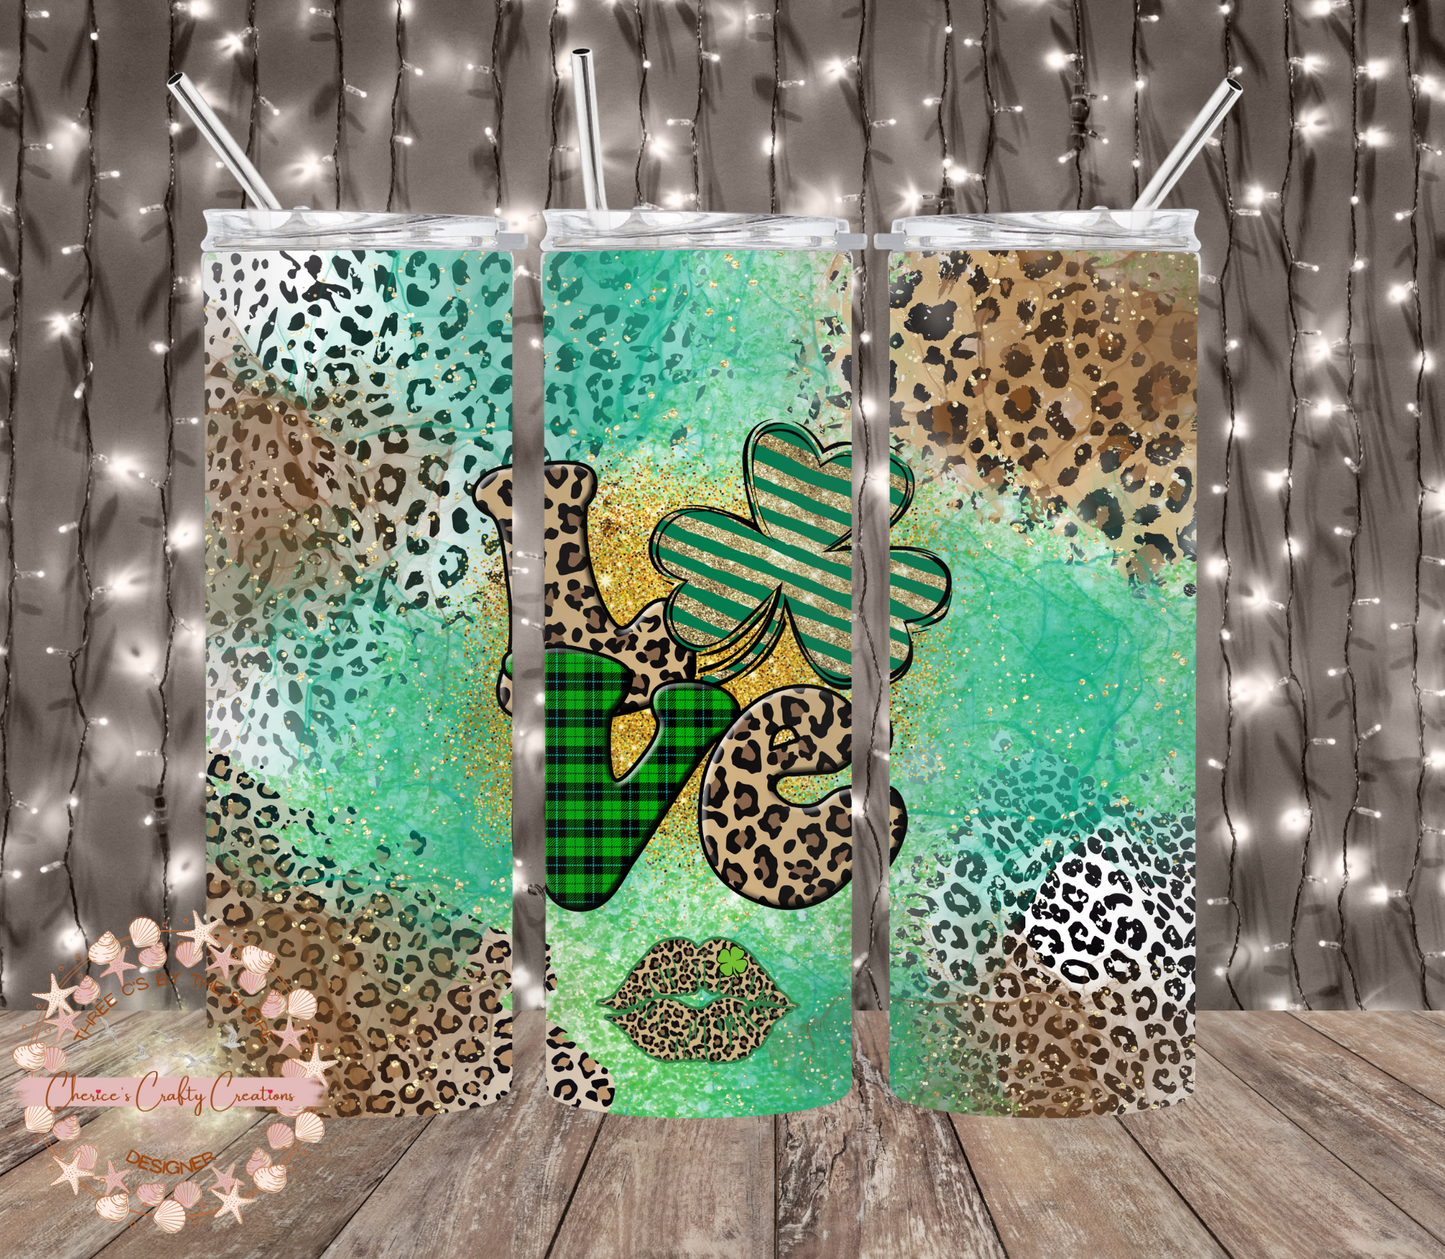 LOVE, SHAMROCK AND LEOPARD